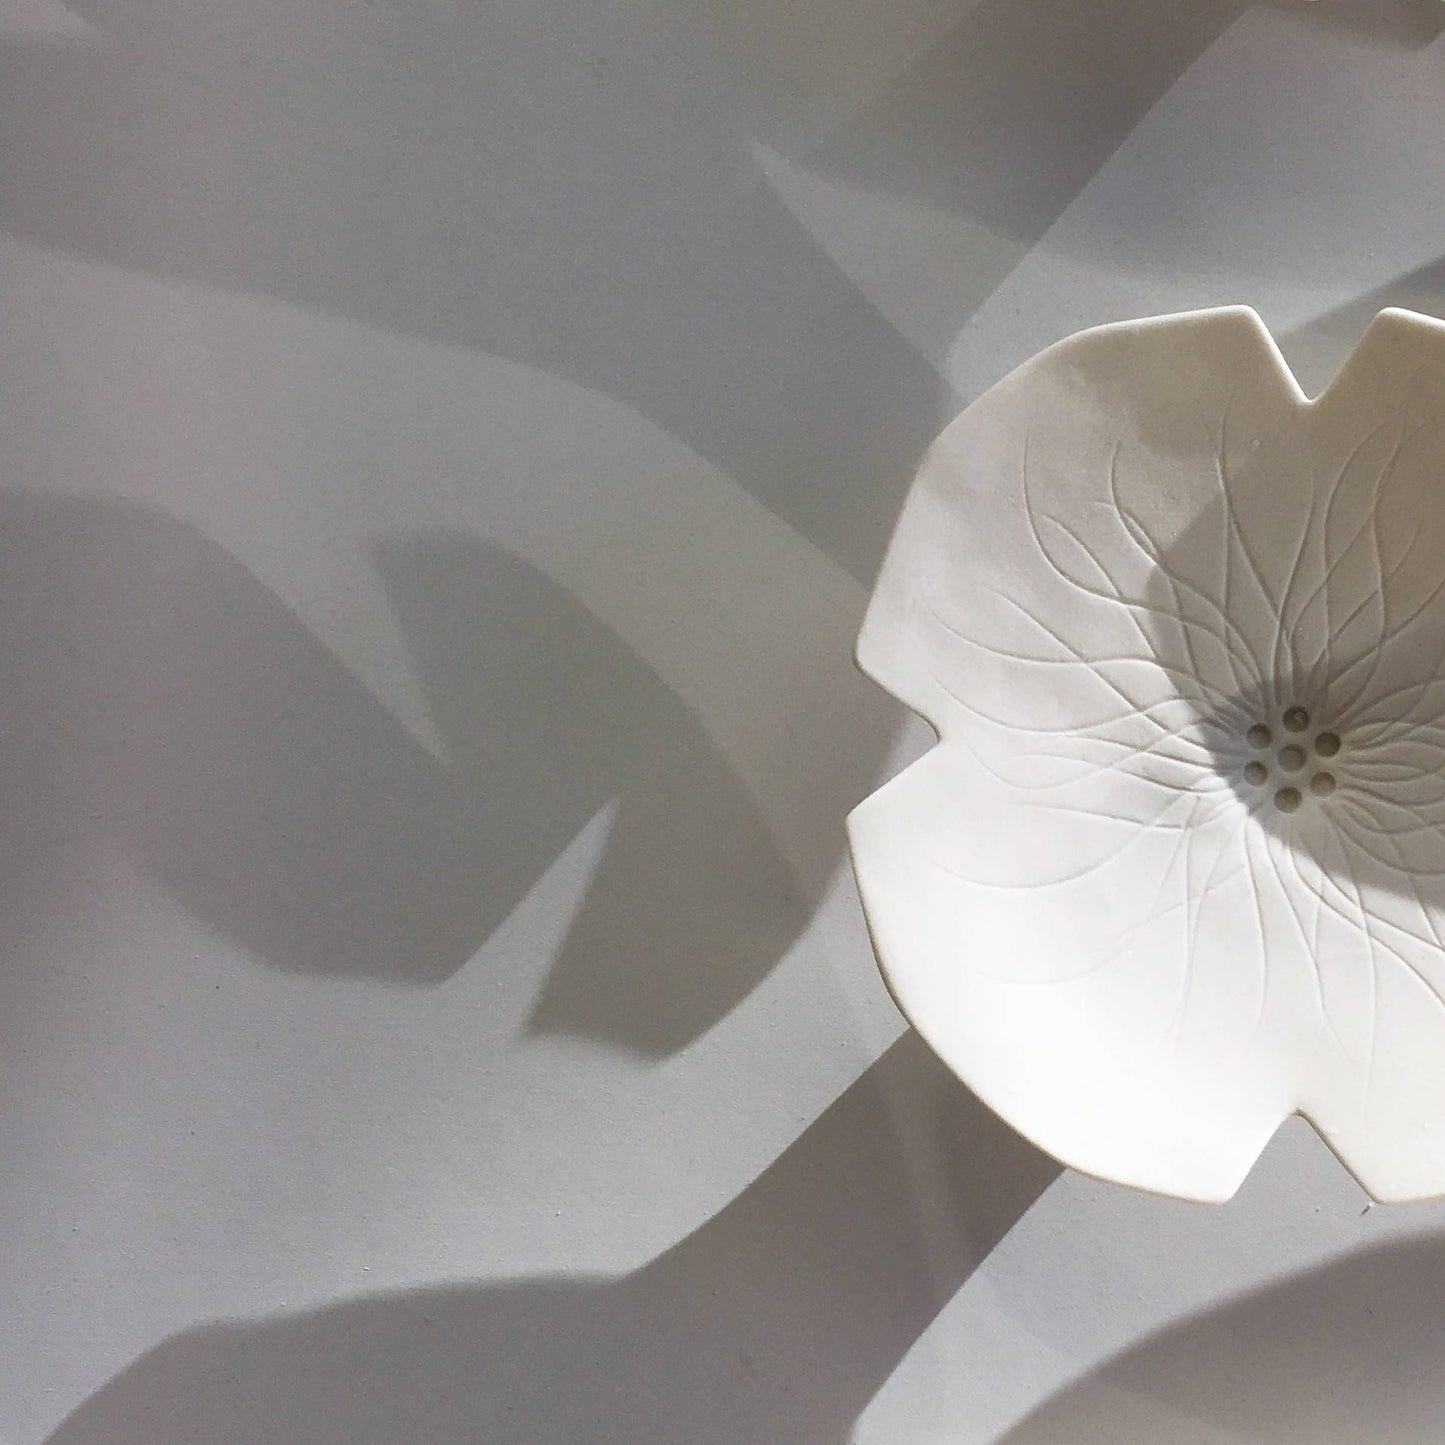 15 Graces Extra Large white & gold wall art Contemporary sculpture Ceramic flowers porcelain Unique modern original artwork MADE TO ORDER